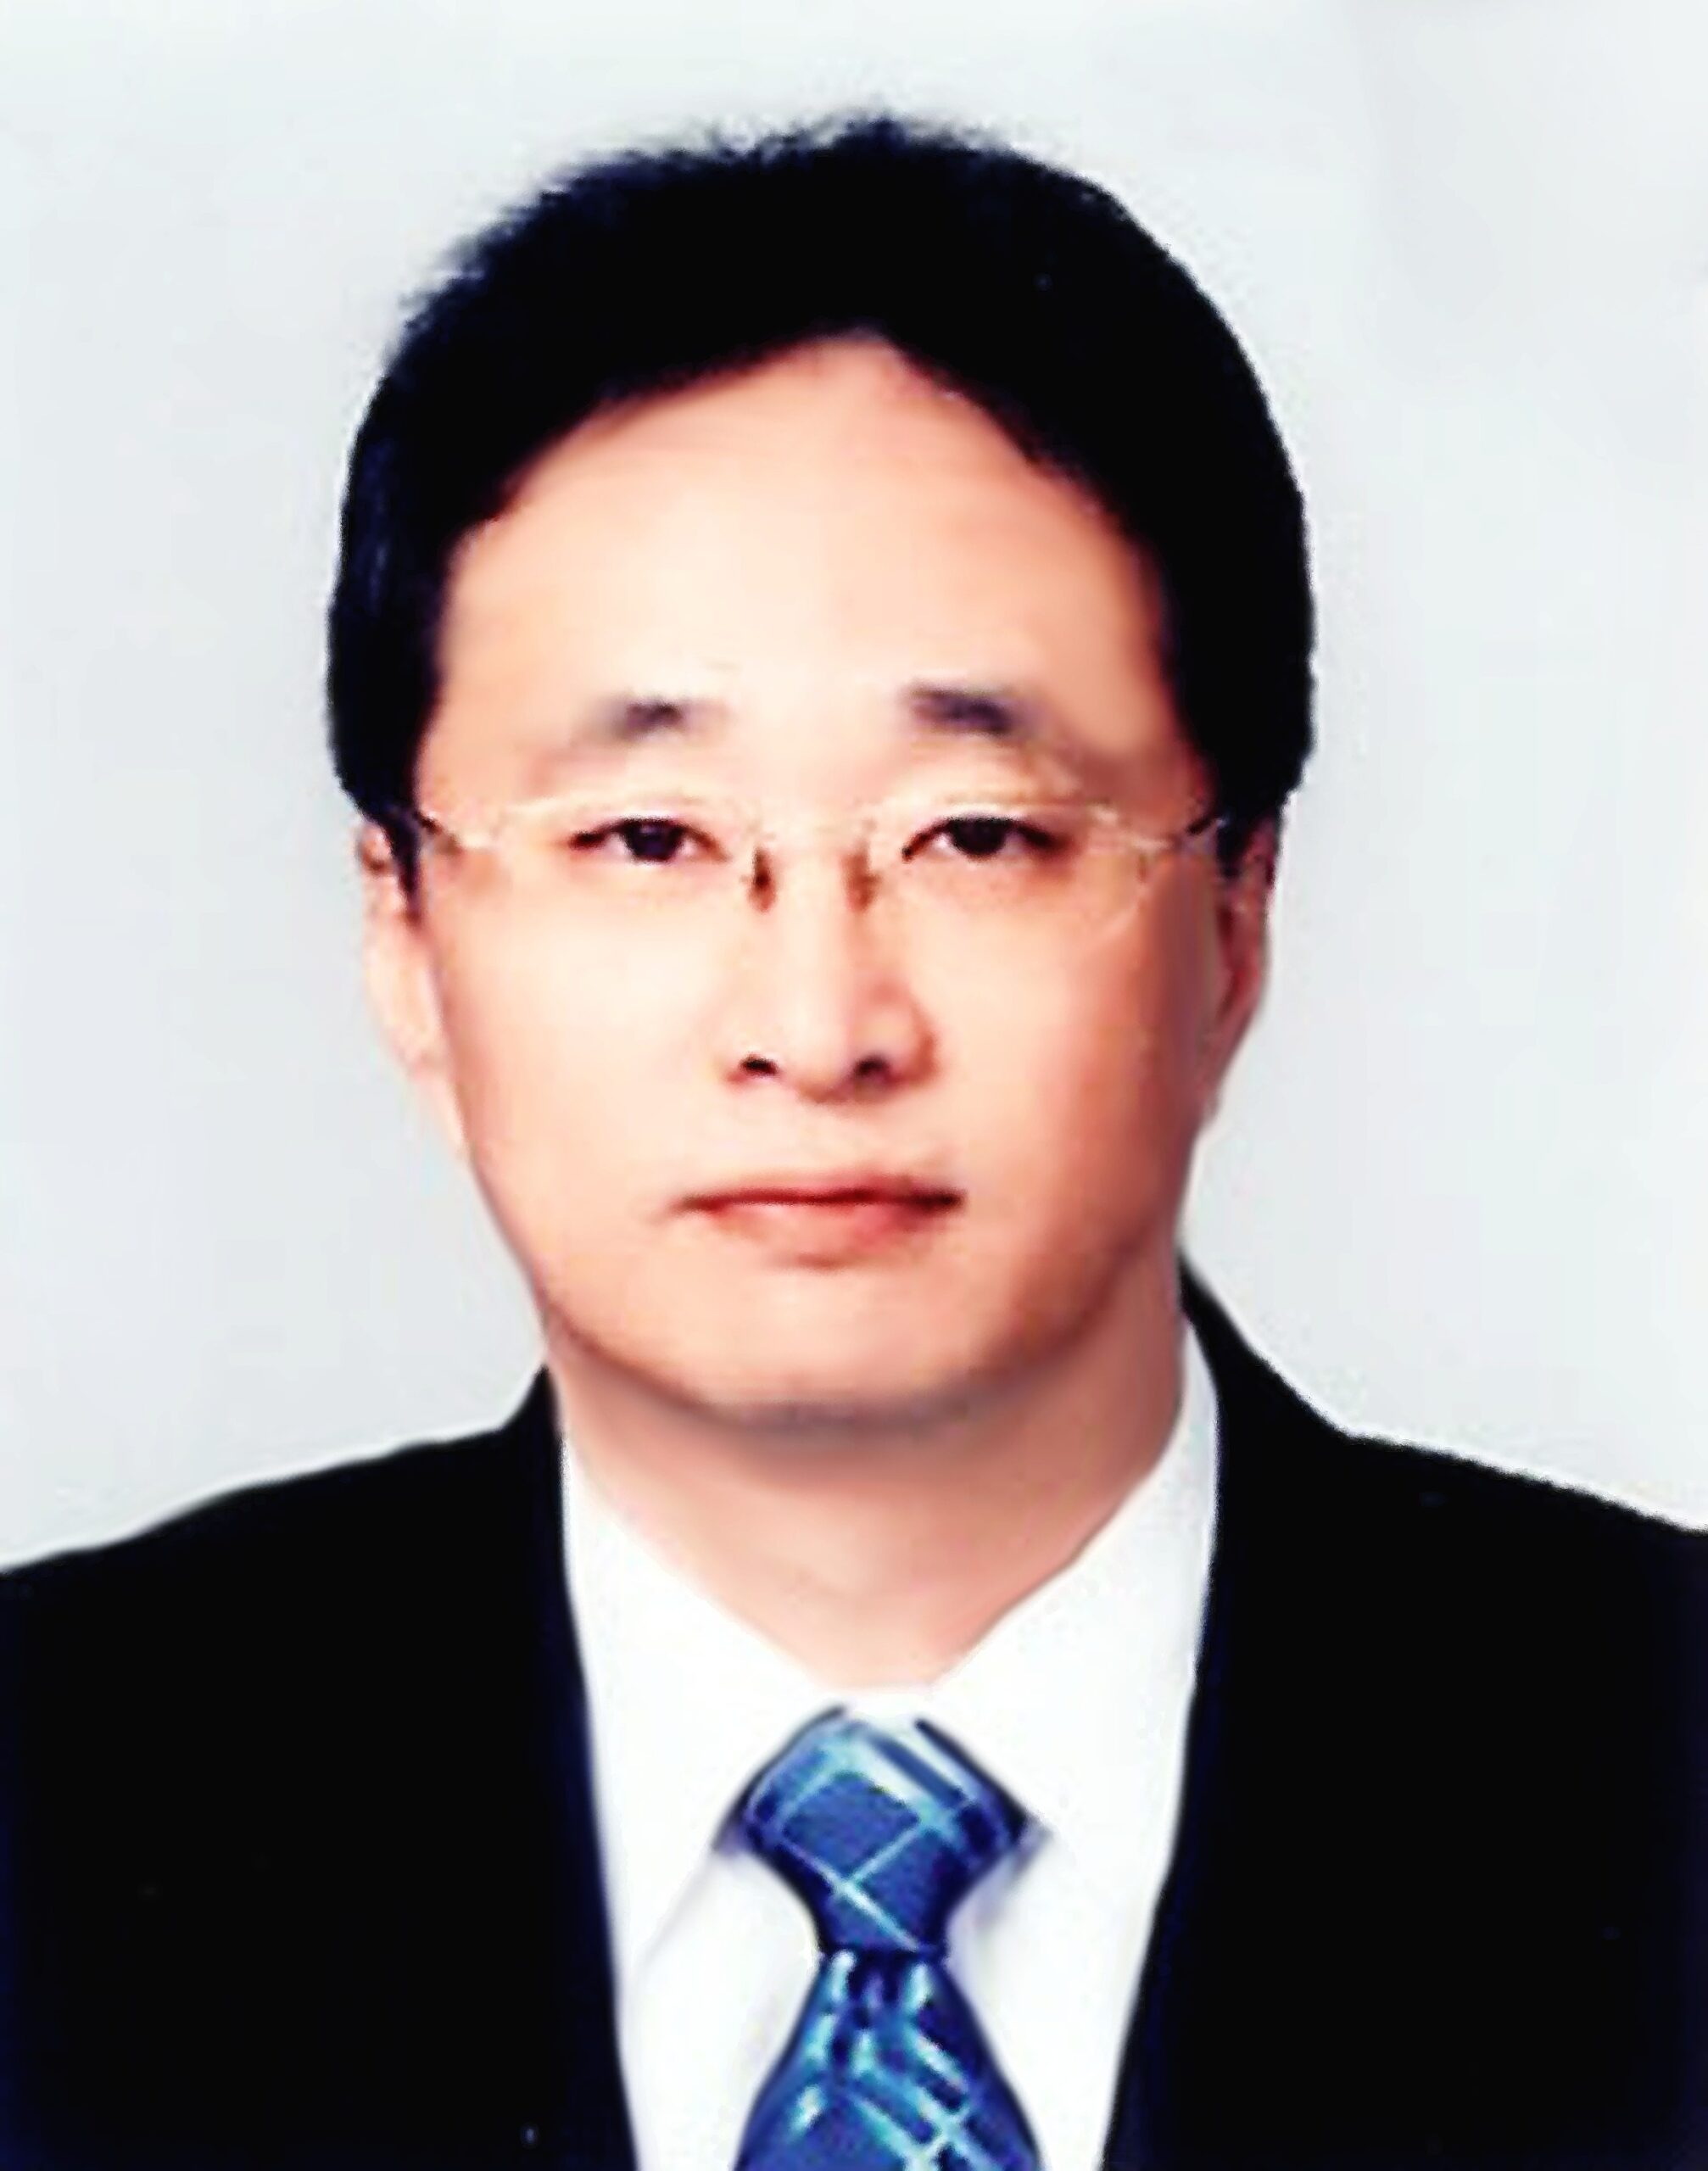 A headshot of Kim Jin-yong, LG Vehicle Component Solutions Company President.